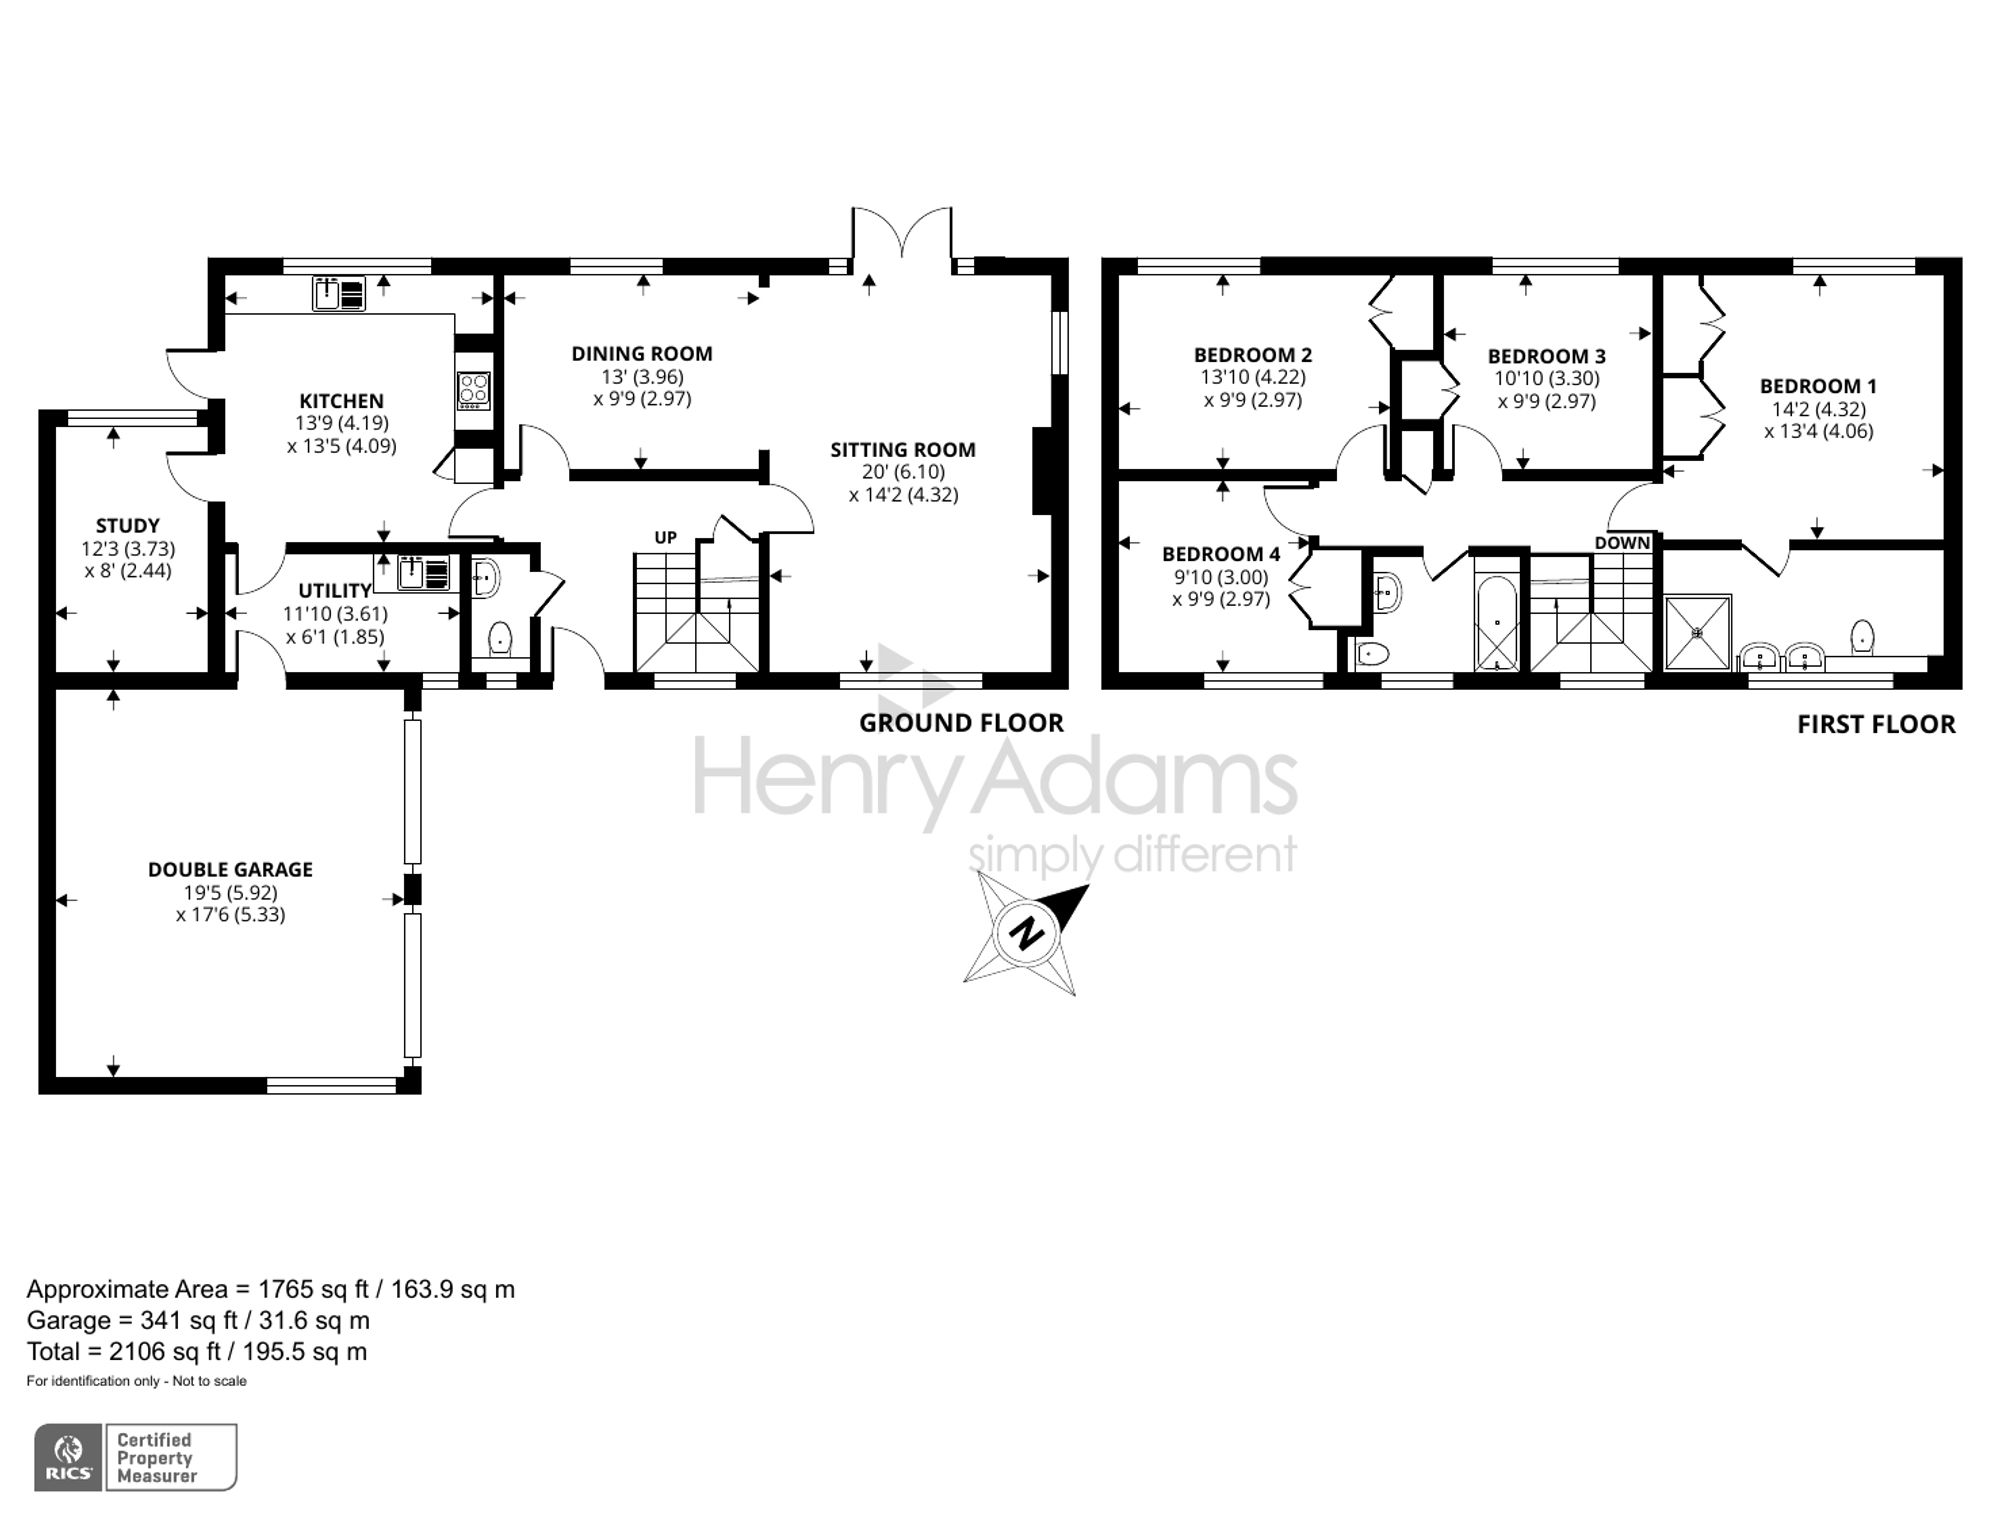 Keepers Wood, Chichester, PO19 floorplans